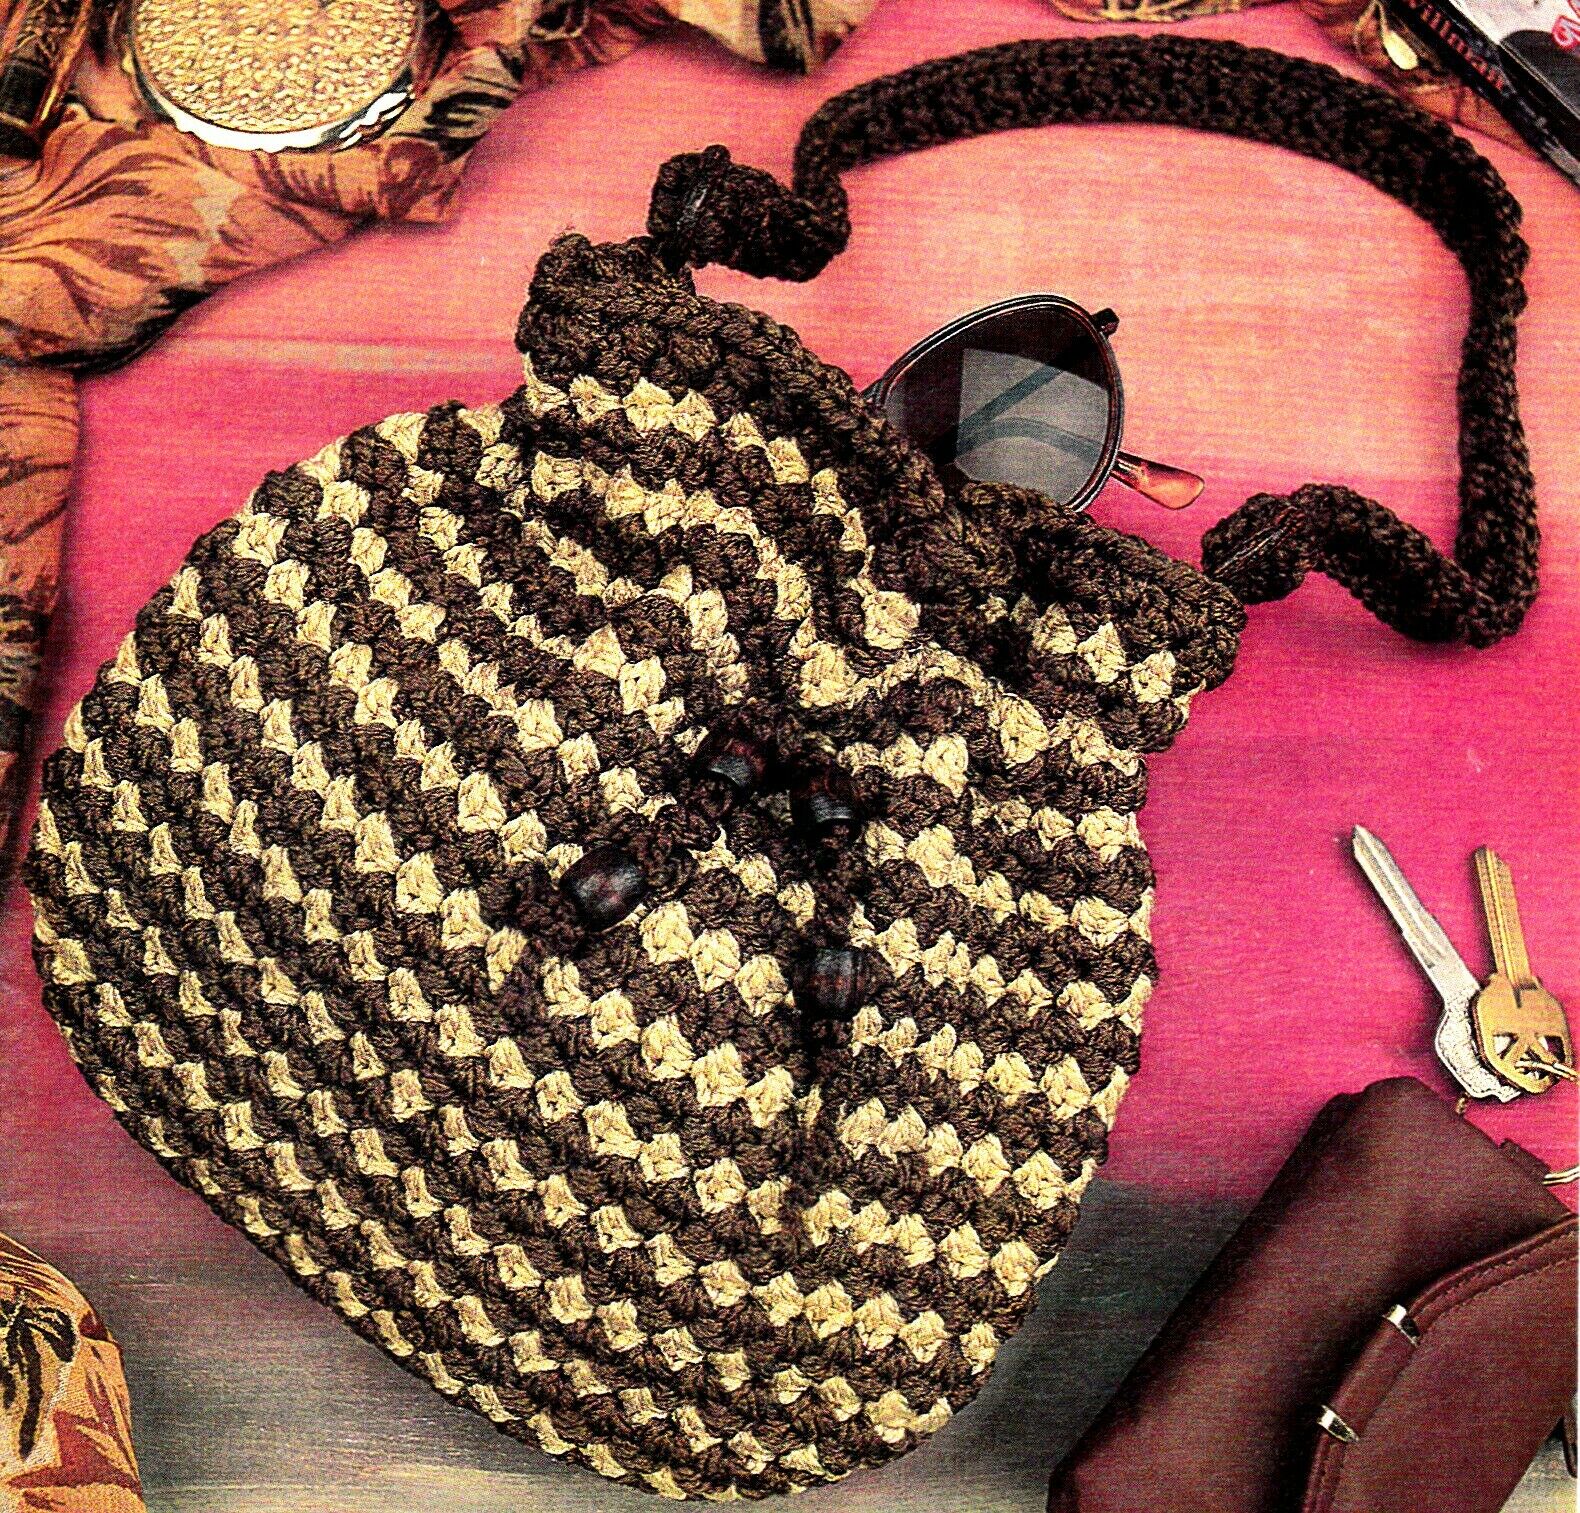 Autumn Striped Purse/tote Bag/crochet Pattern Instructions Only